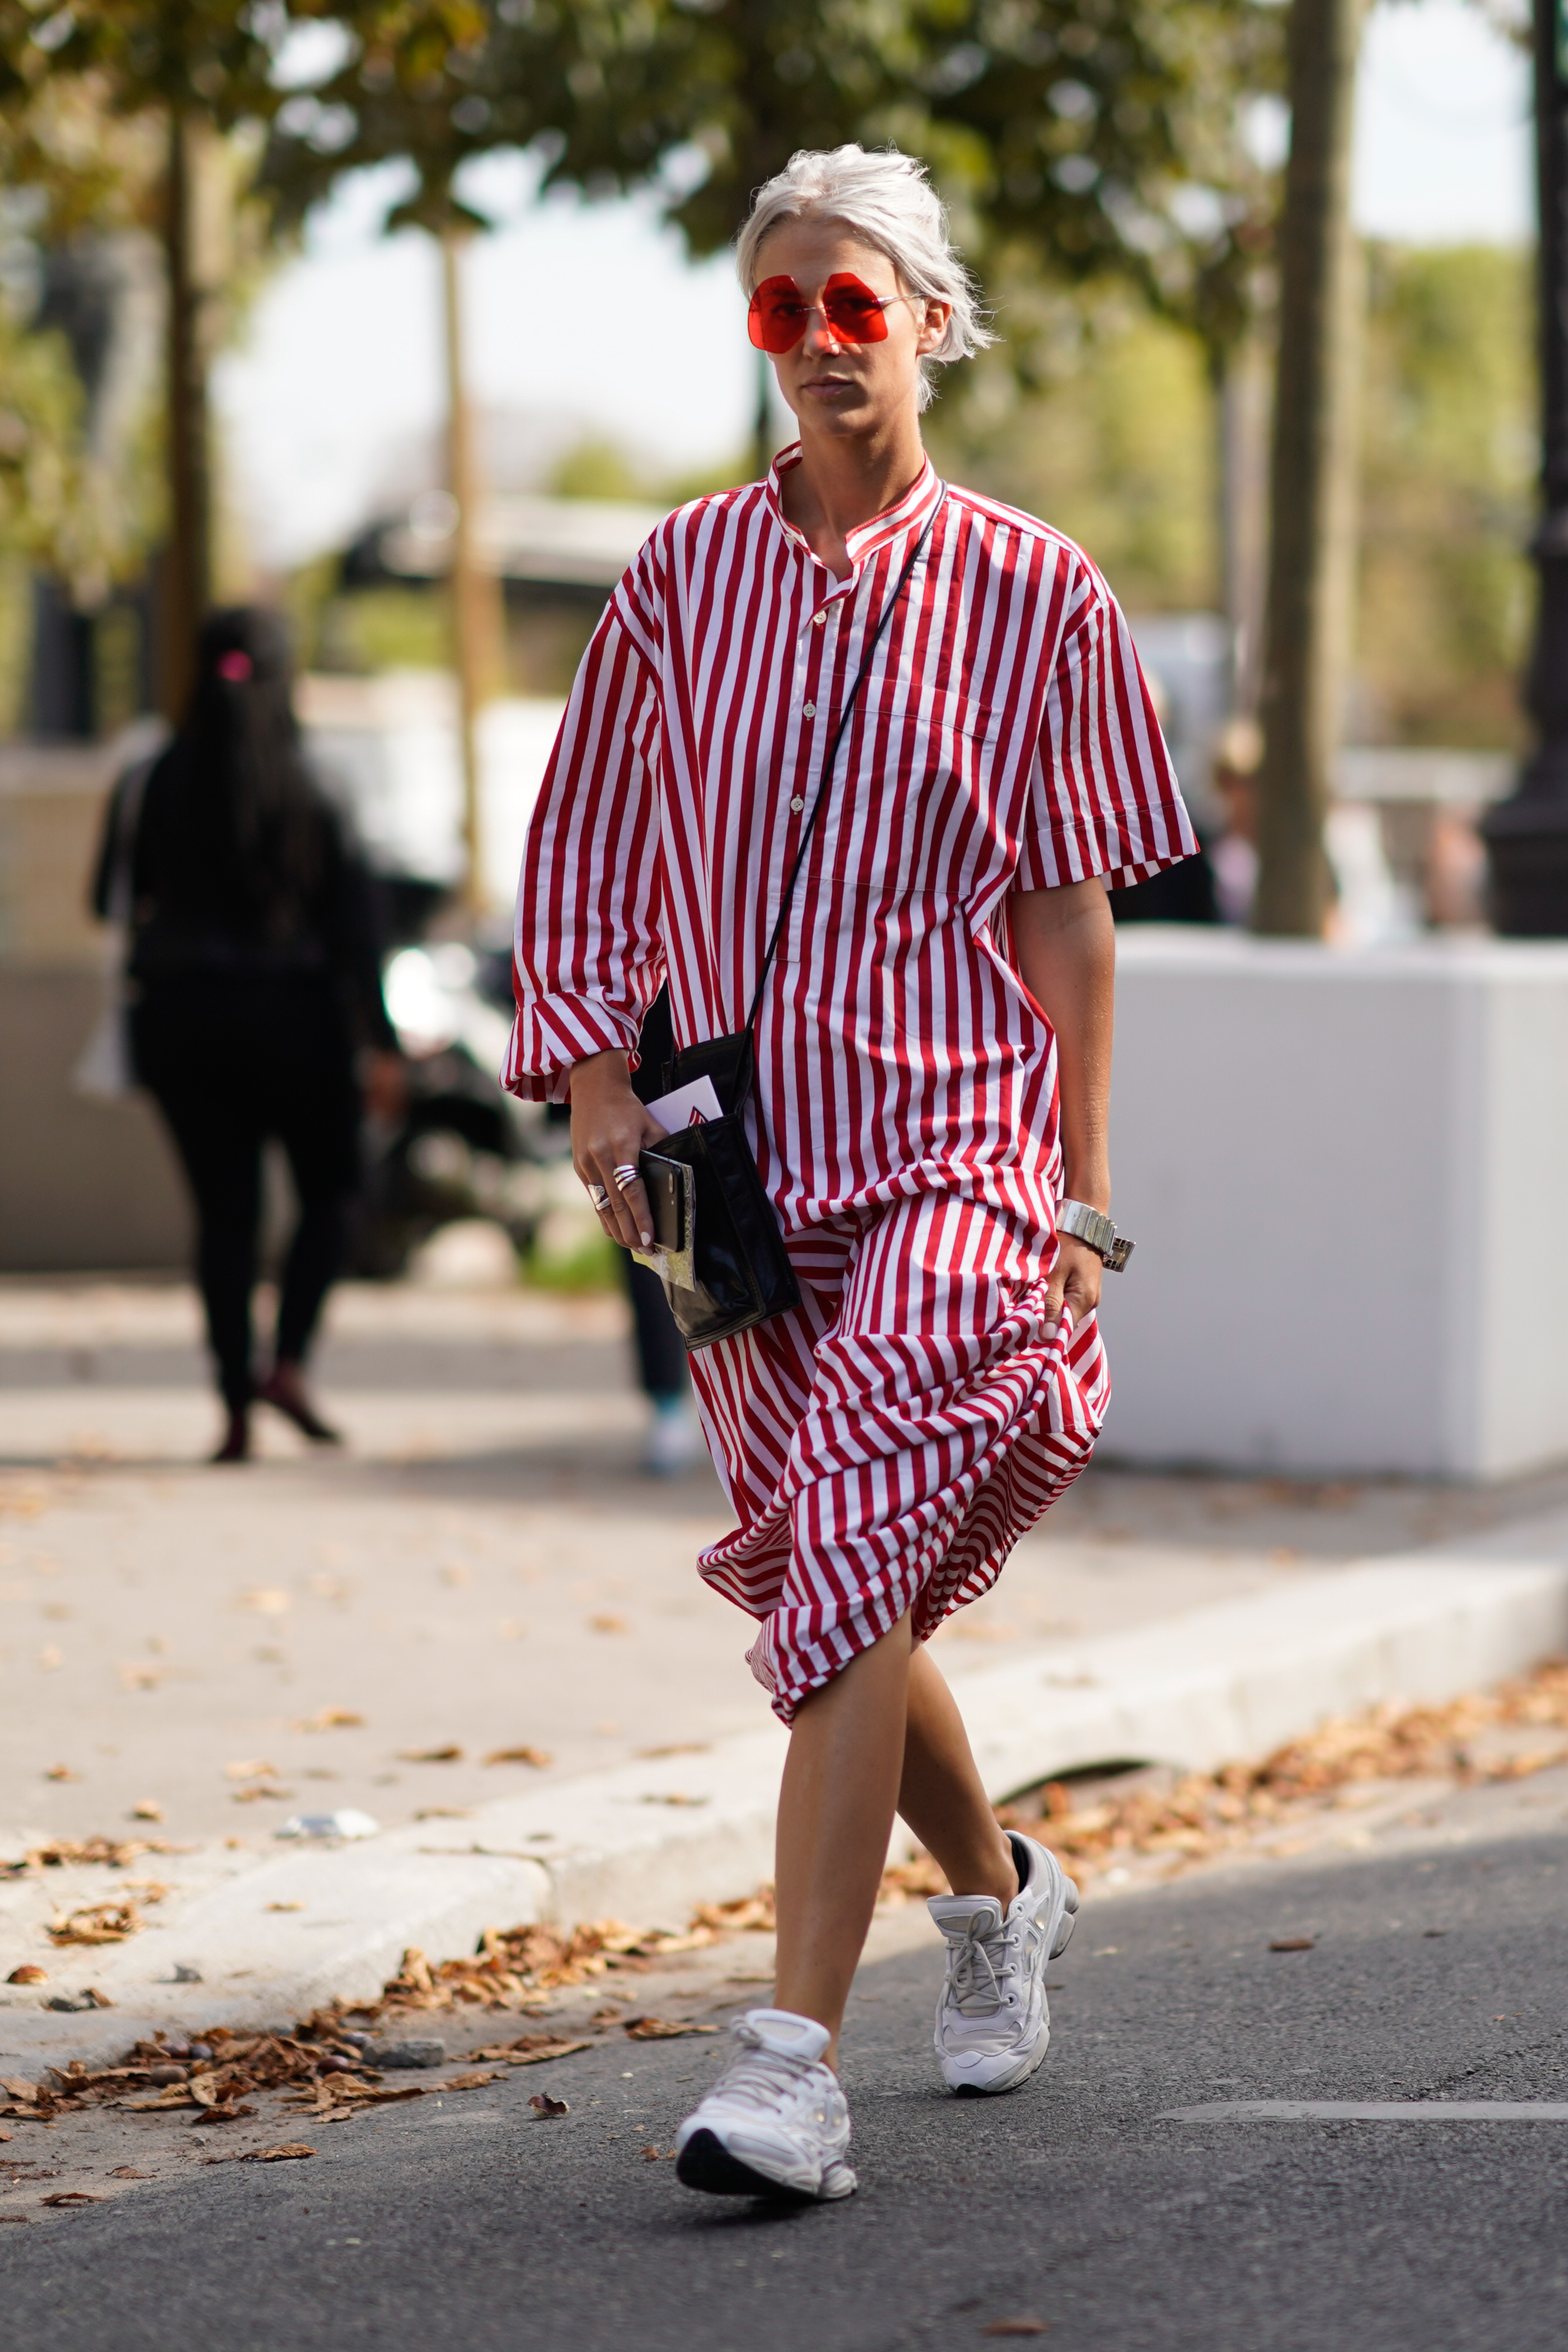 PARIS, FRANCE - SEPTEMBER 29: A guest wears a white and red striped dress, outside Issey Miyake, during Paris Fashion Week Womenswear Spring/Summer 2018, on September 29, 2017 in Paris, France. (Photo by Edward Berthelot/Getty Images)